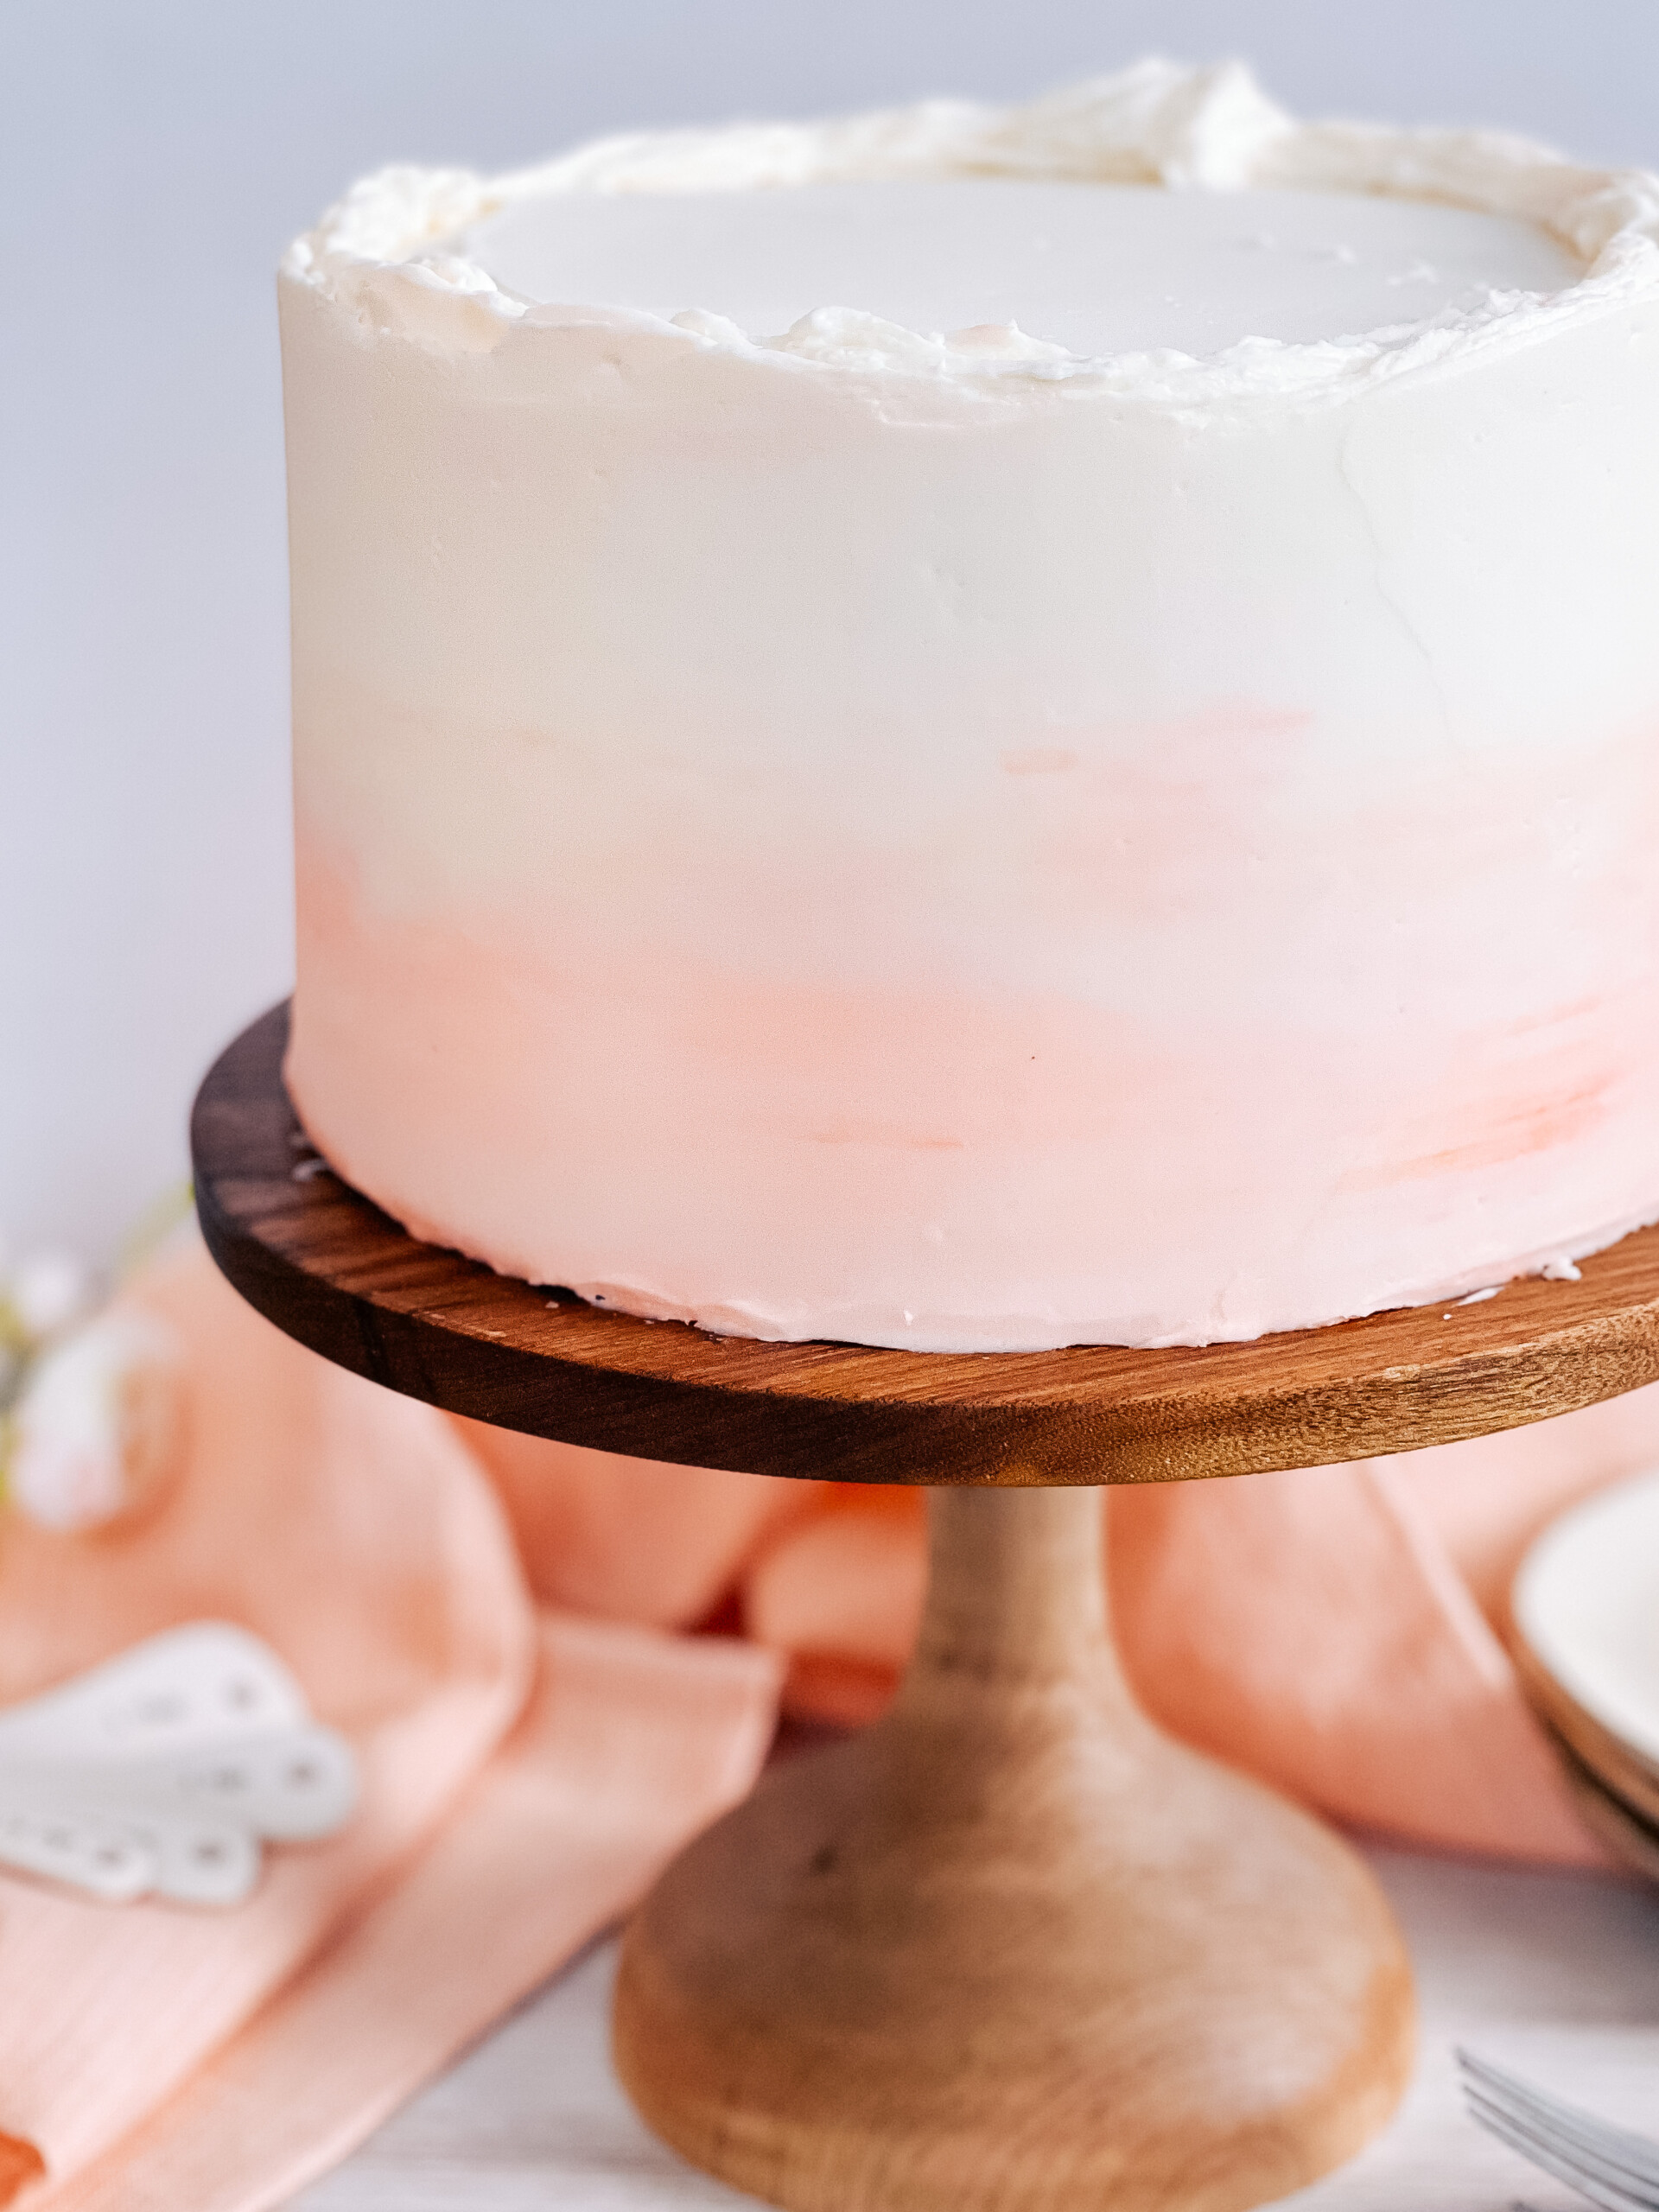 Ombre peach cake on cake stand